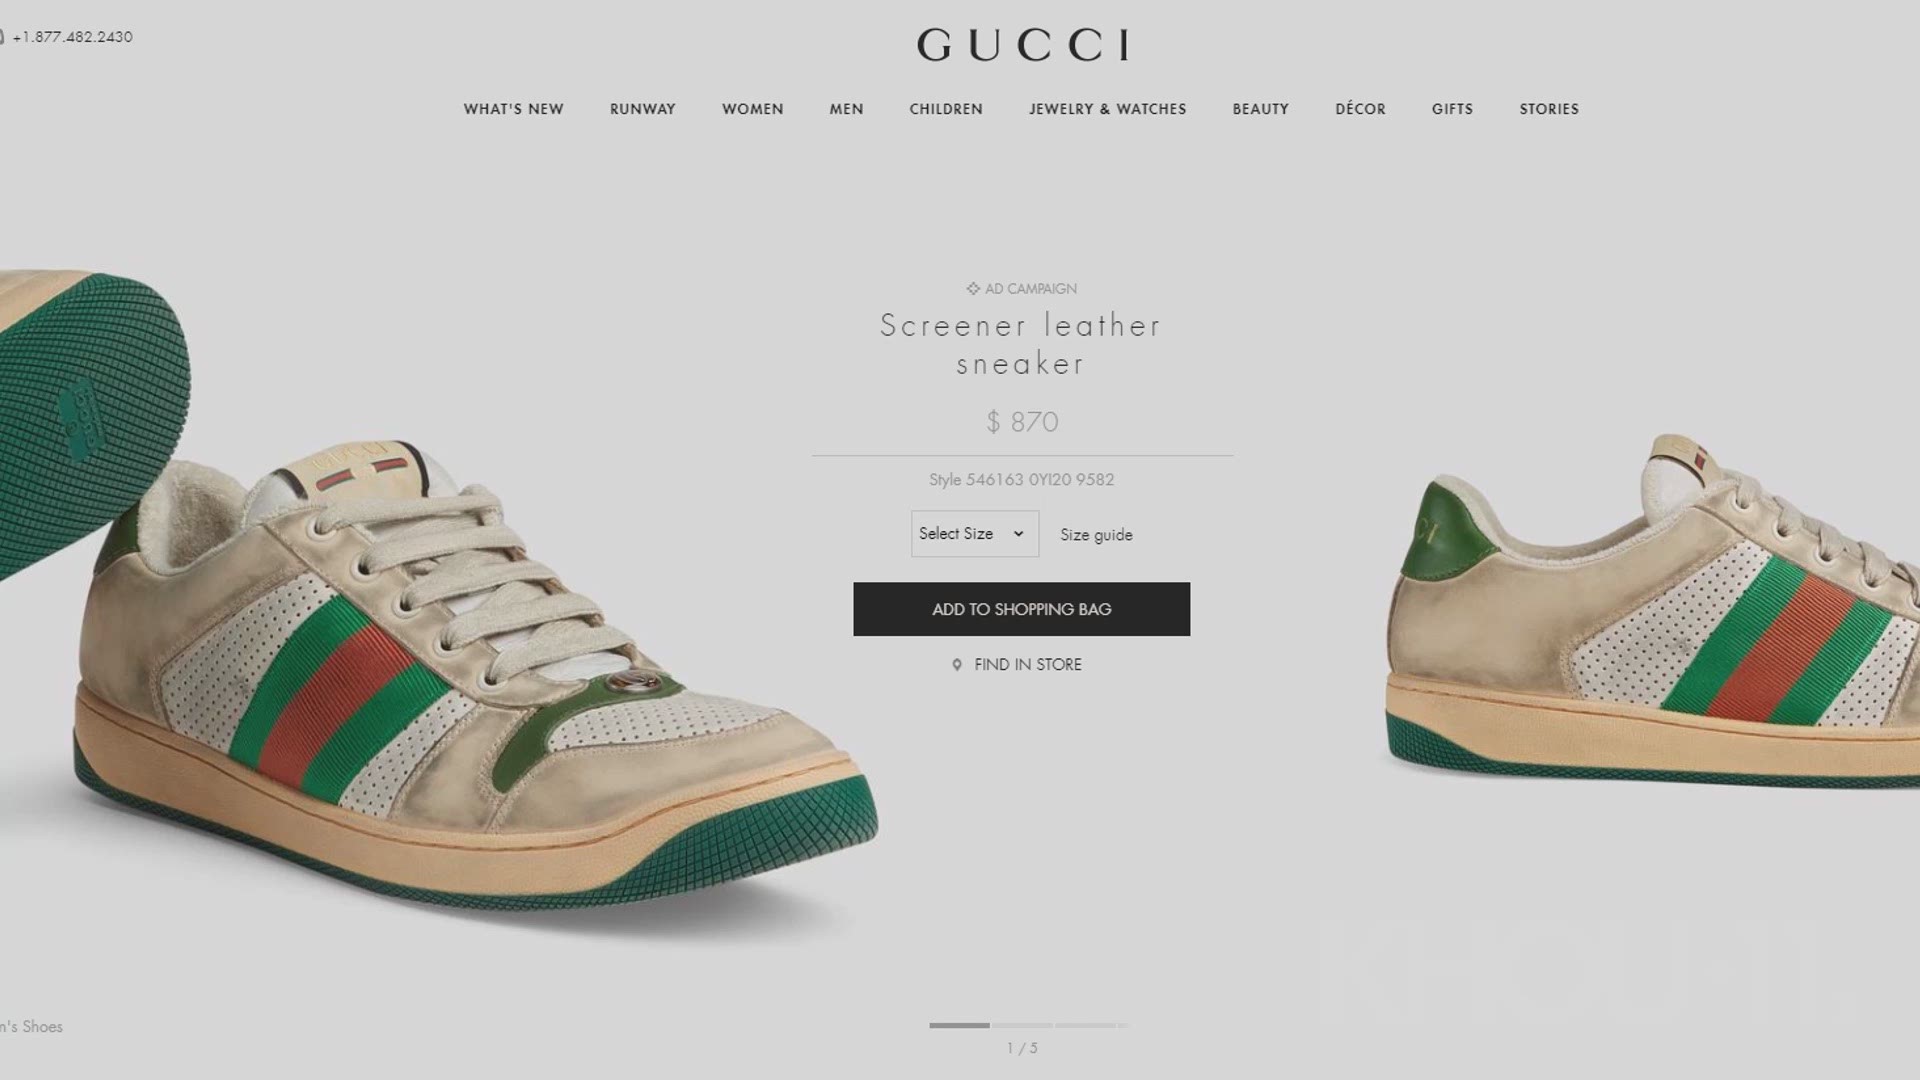 Gucci is selling dirty sneakers for 